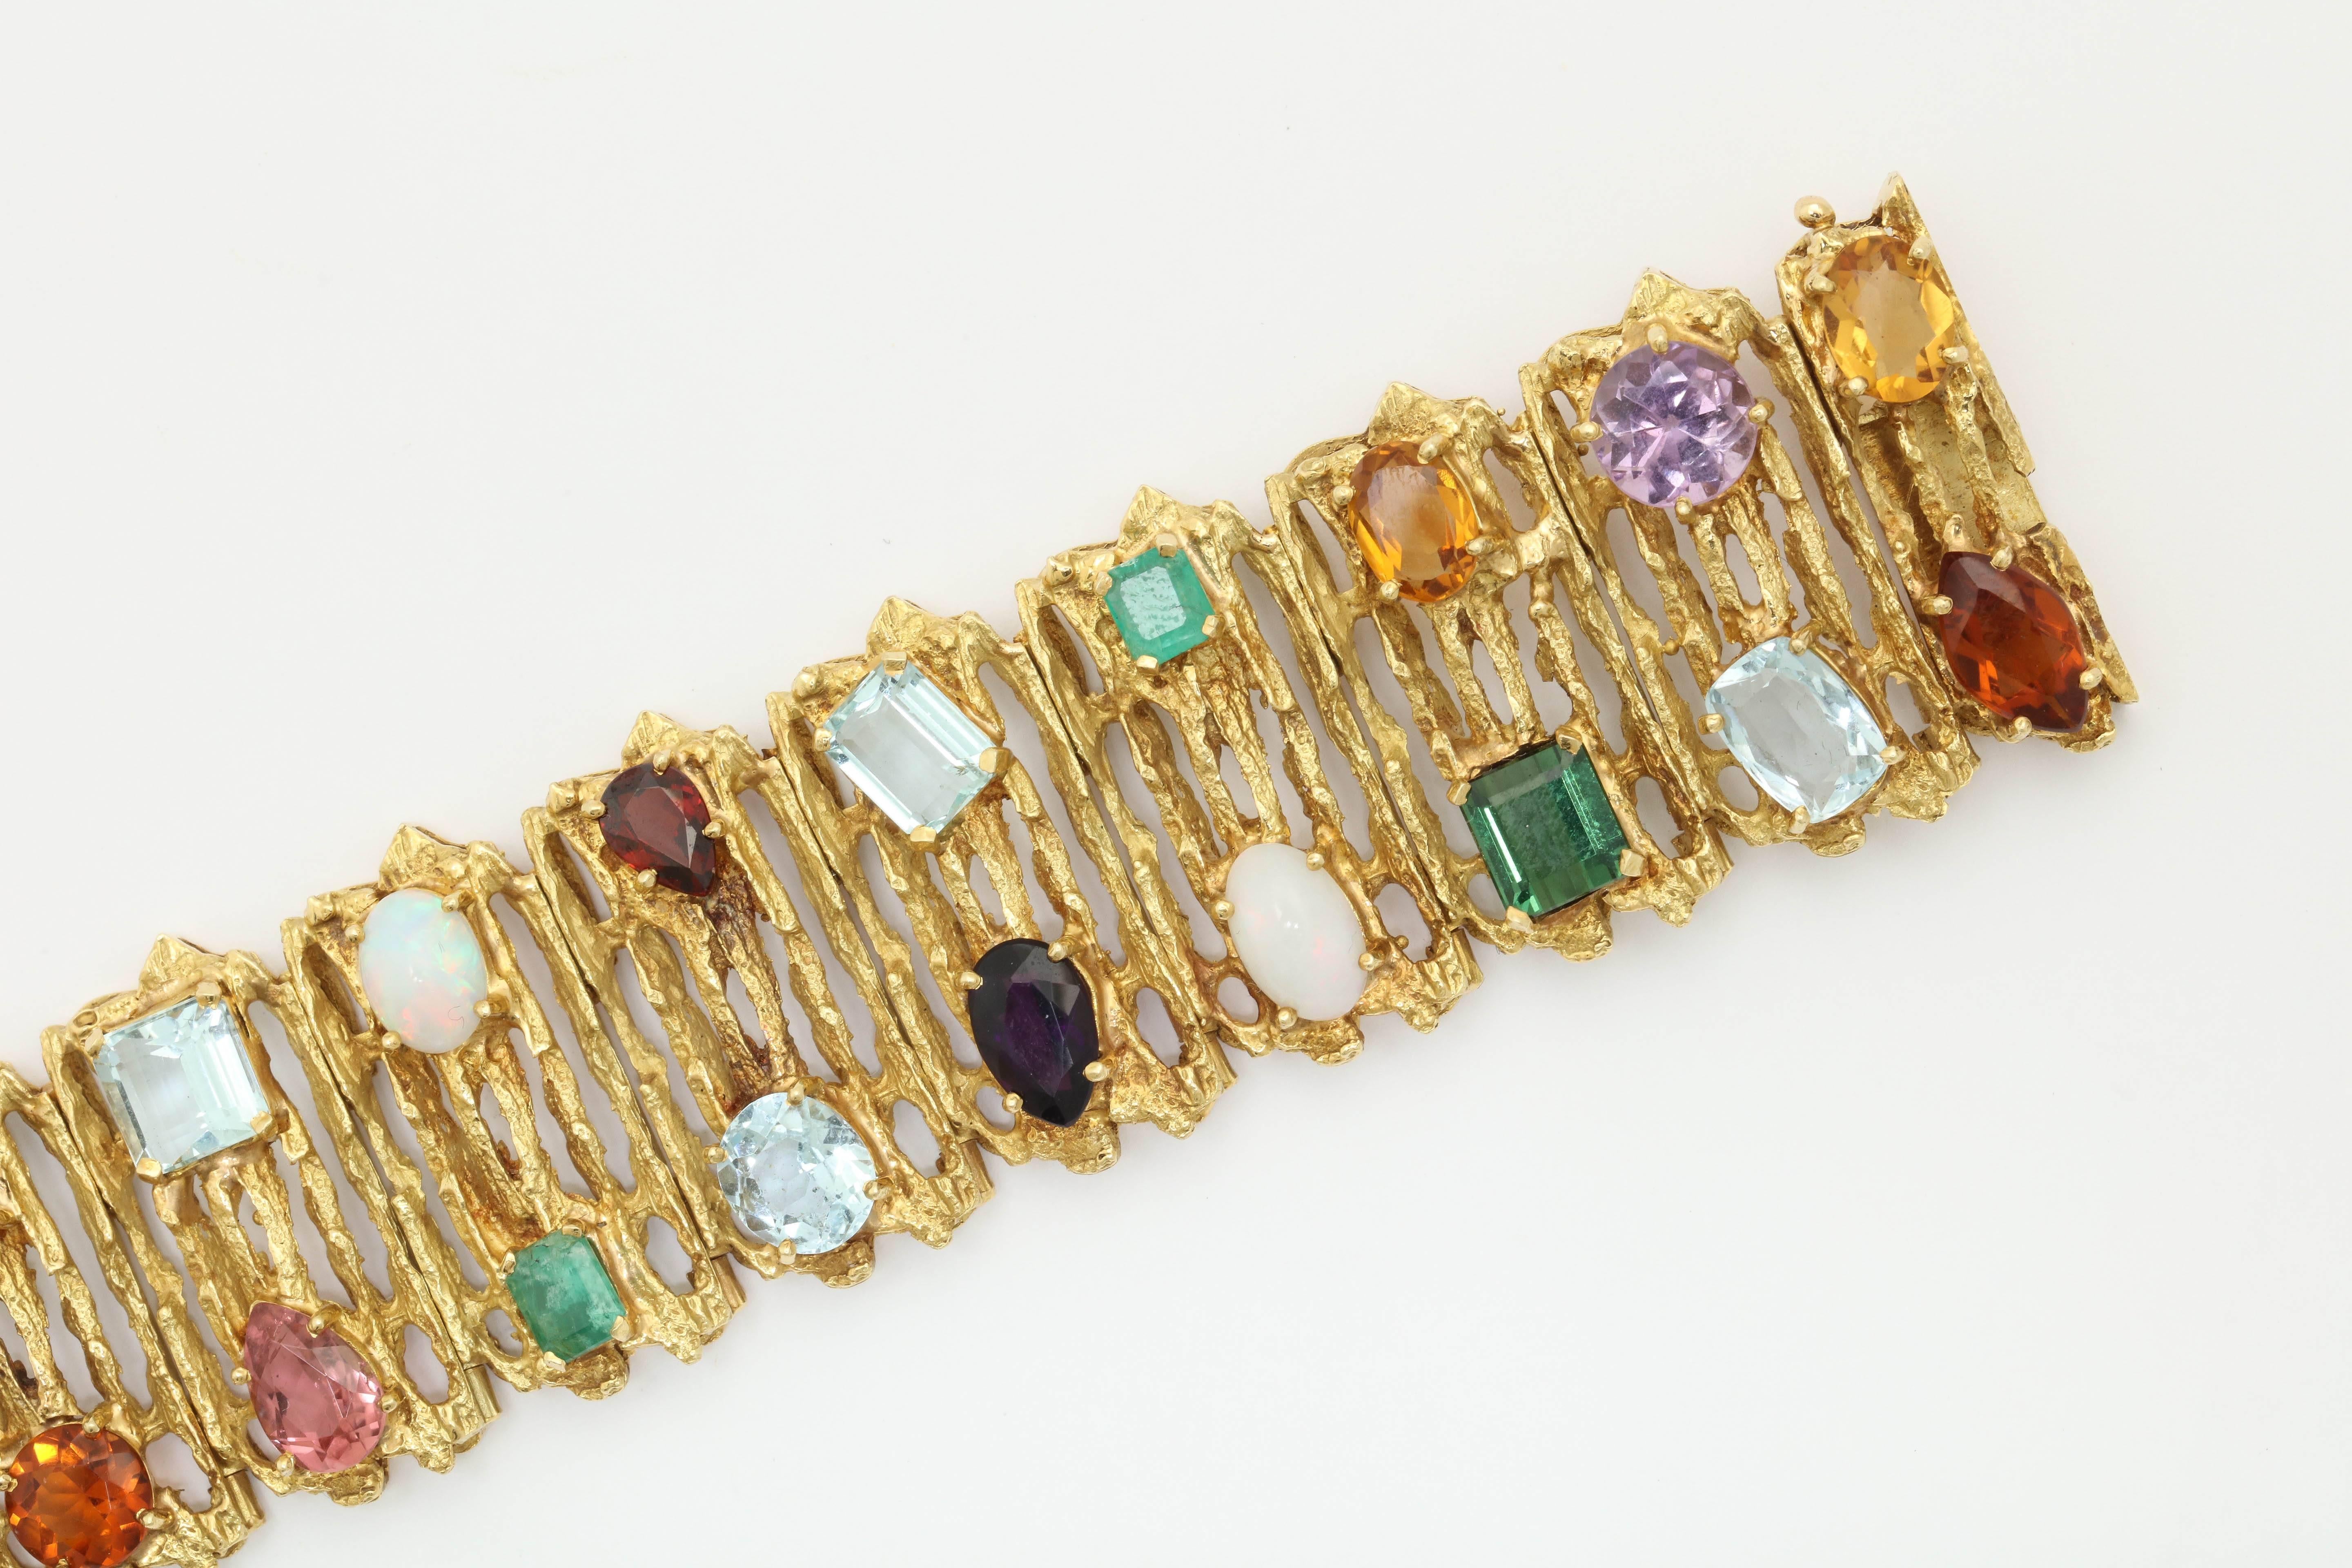 18kt Yellow Gold Textured Bracelet Consisting of Multi-Colored Gem Stones consisting of :Aquamarines,Garnets,Amethysts,Emeralds,Opals ,Moonstones &Green Tourmalines With Citrine Faceted Stones thru-out Bracelet.Signed H.Stern Designed in the 1960's